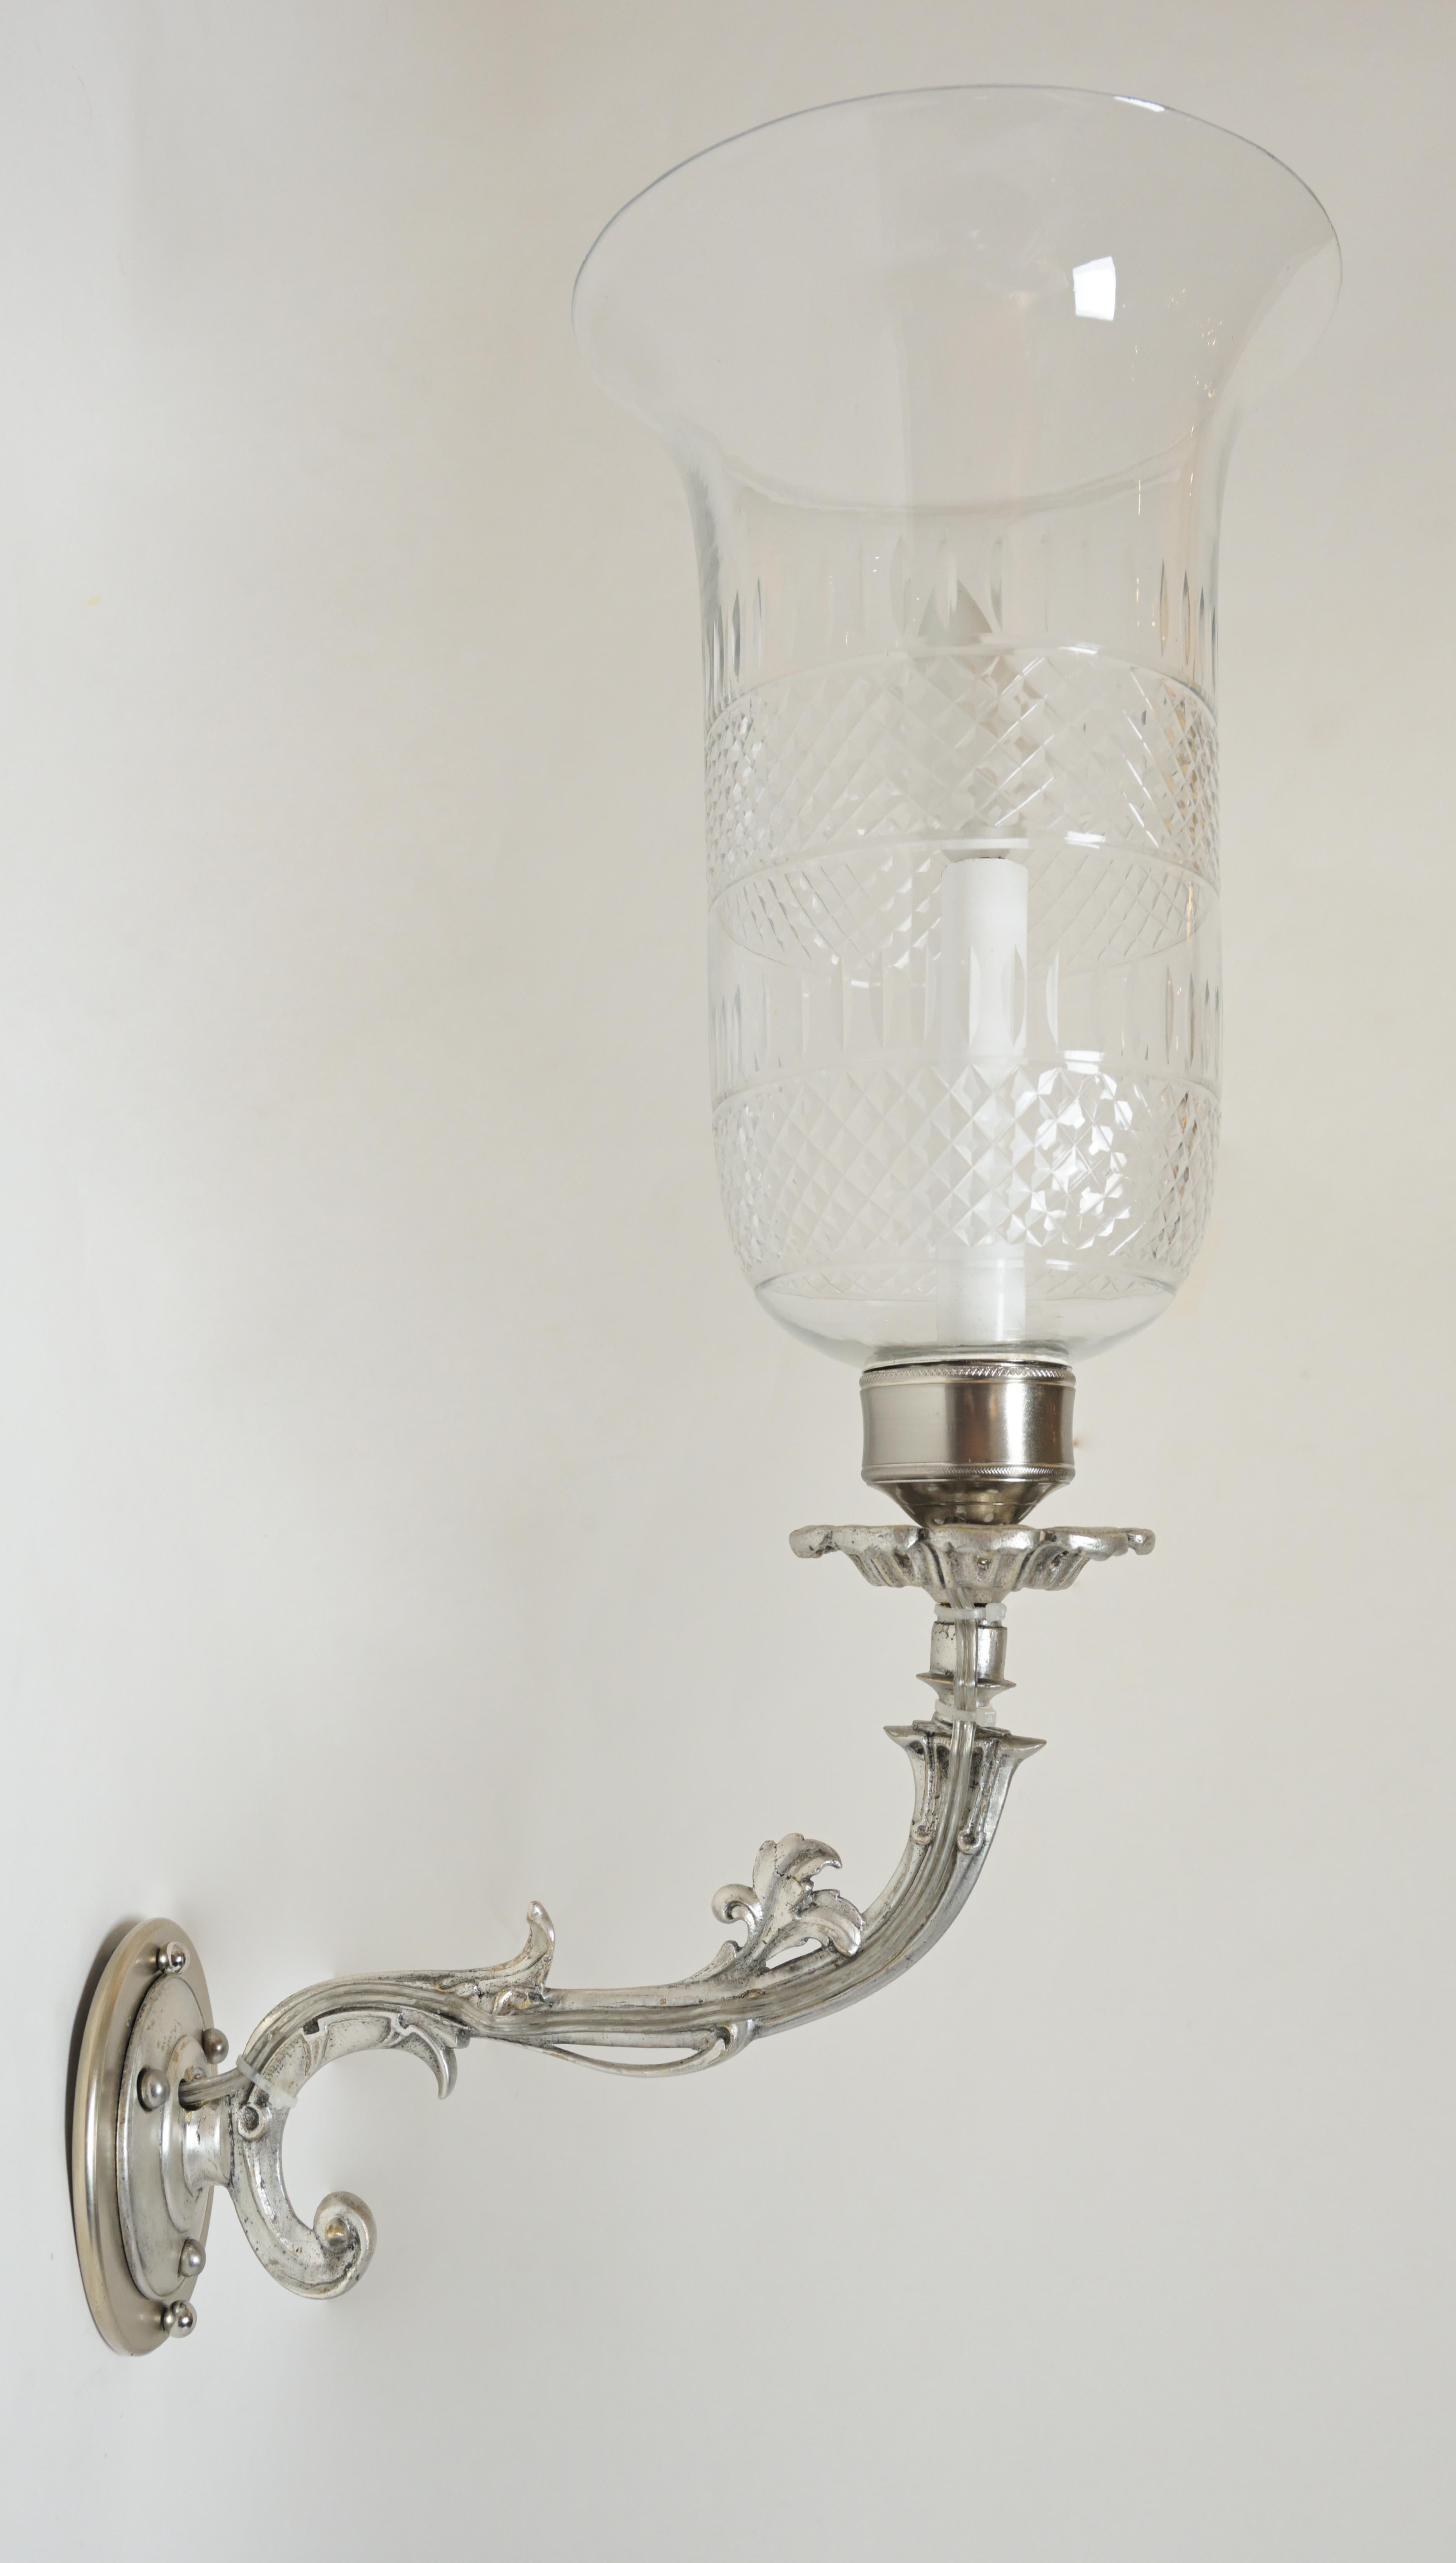 European Pair of 19th Century Antique Silver Sconces with Cut Crystal Hurricane Shades